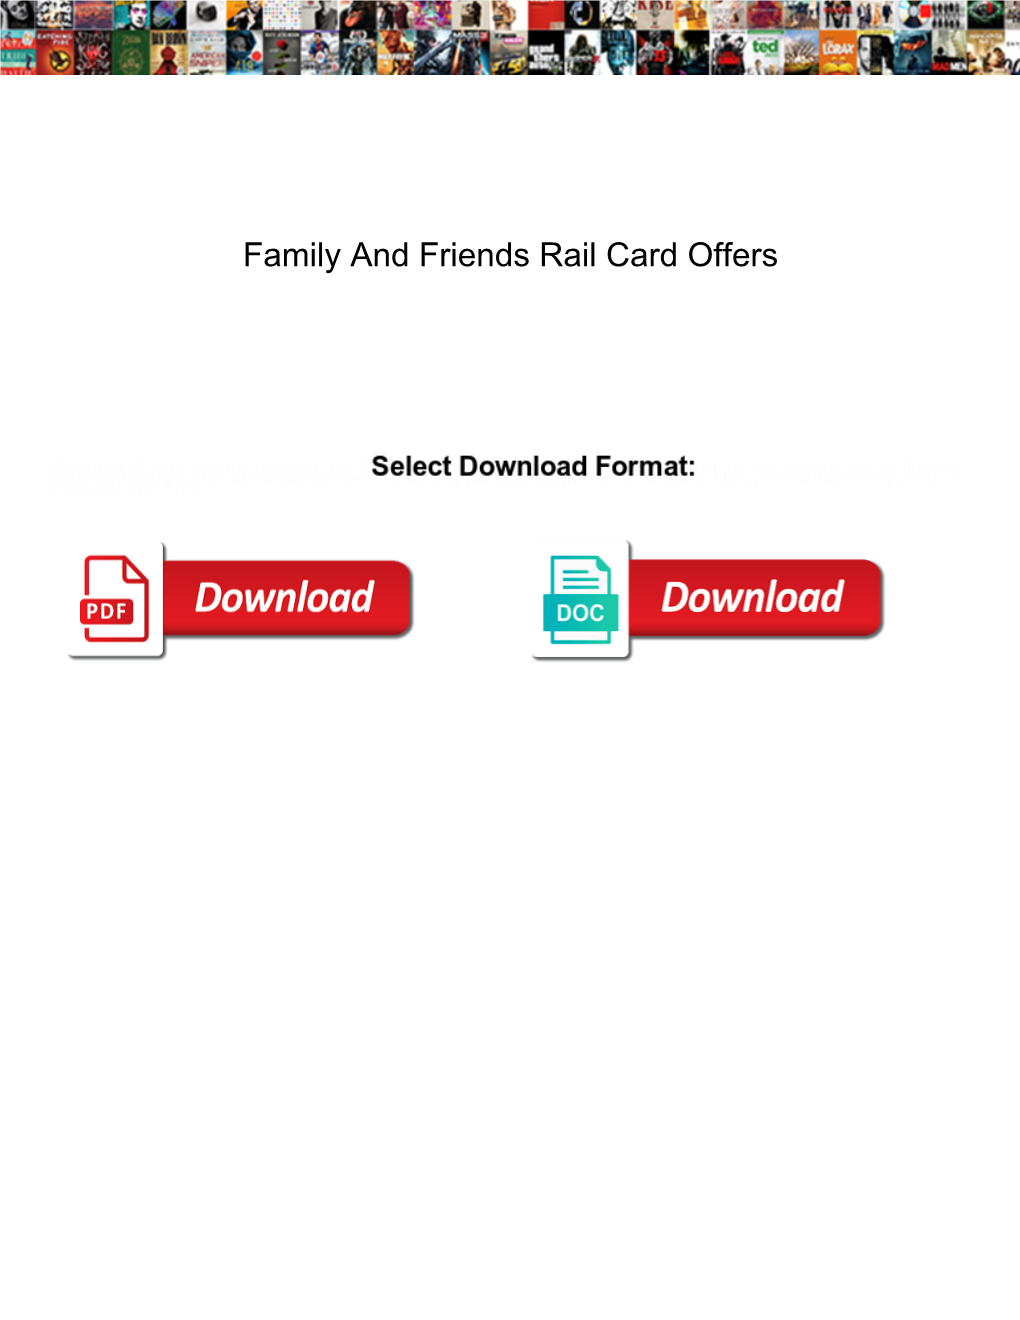 Family and Friends Rail Card Offers